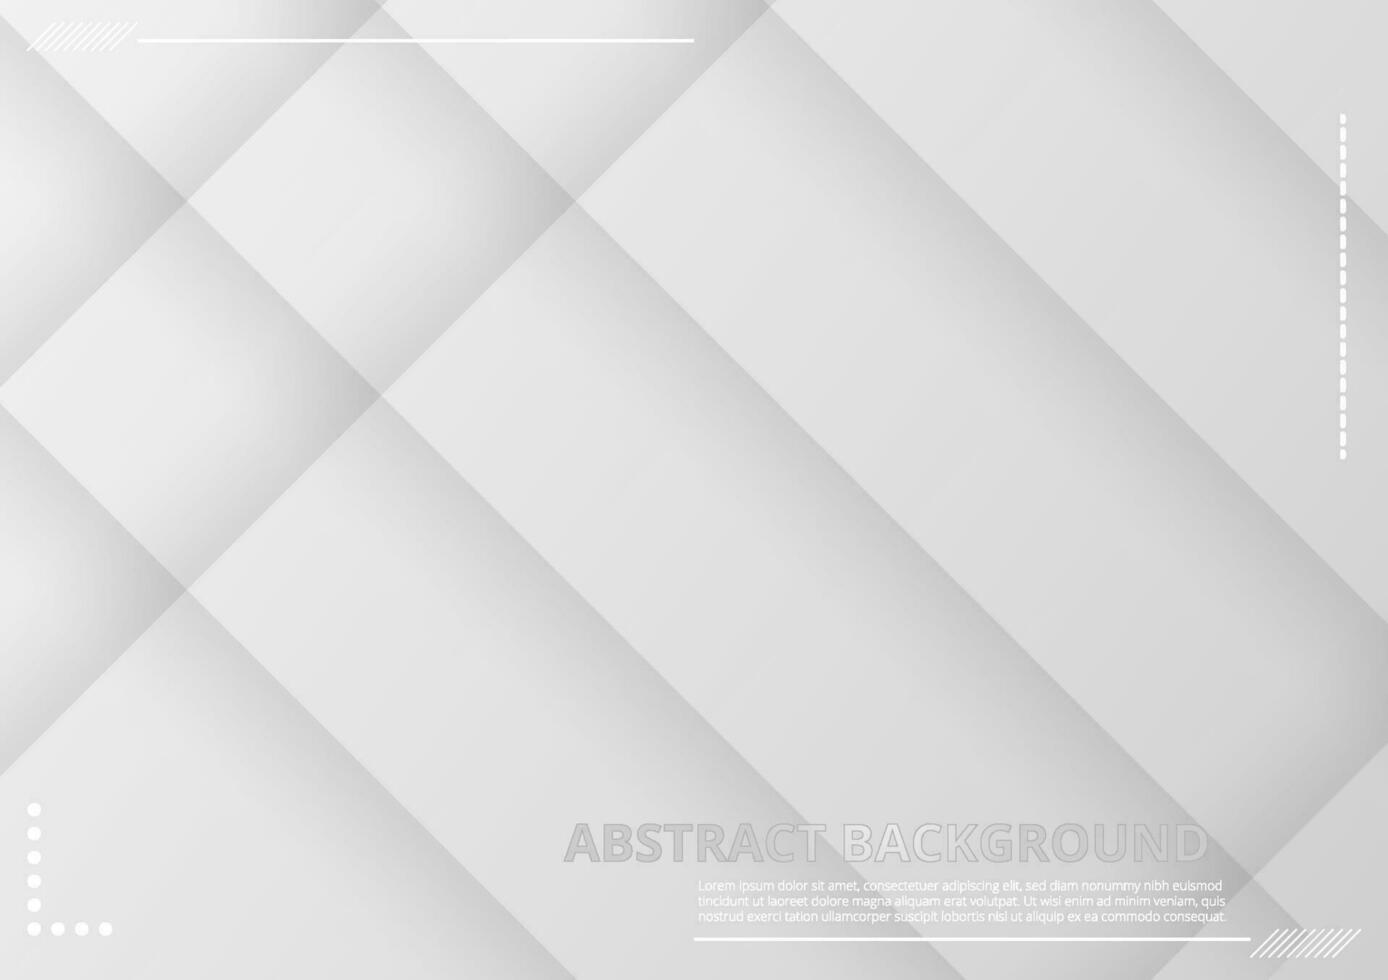 Minimal white background. Abstract style. Line art layer. Vector illustrator graphic.